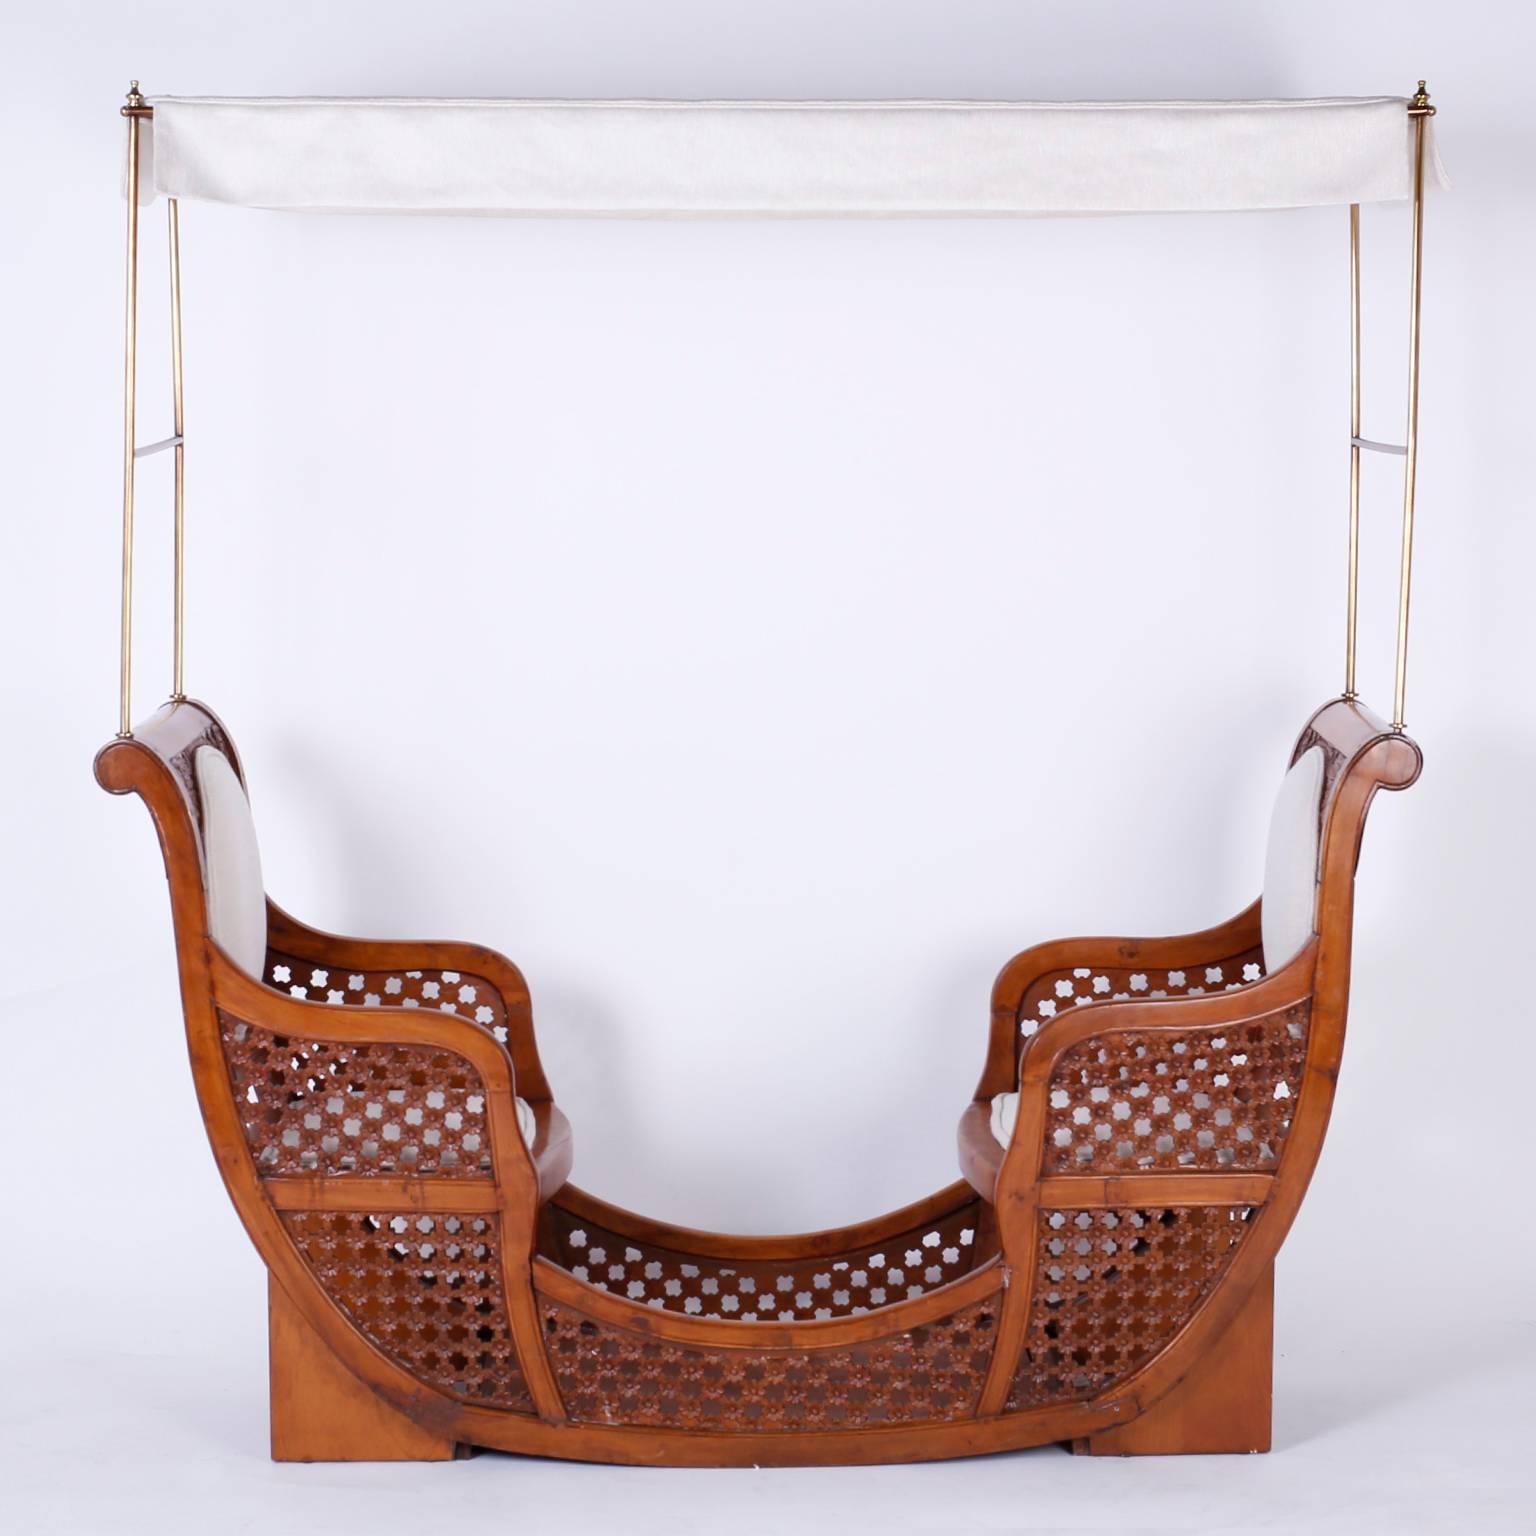 Antique elephant seat or howdah converted to a tête à tête. Featuring a brass canopy frame, upholstered seats at each end of a graceful mahogany frame carved with flowers, and a floral carved trellis on the sides. If only furniture could talk, what